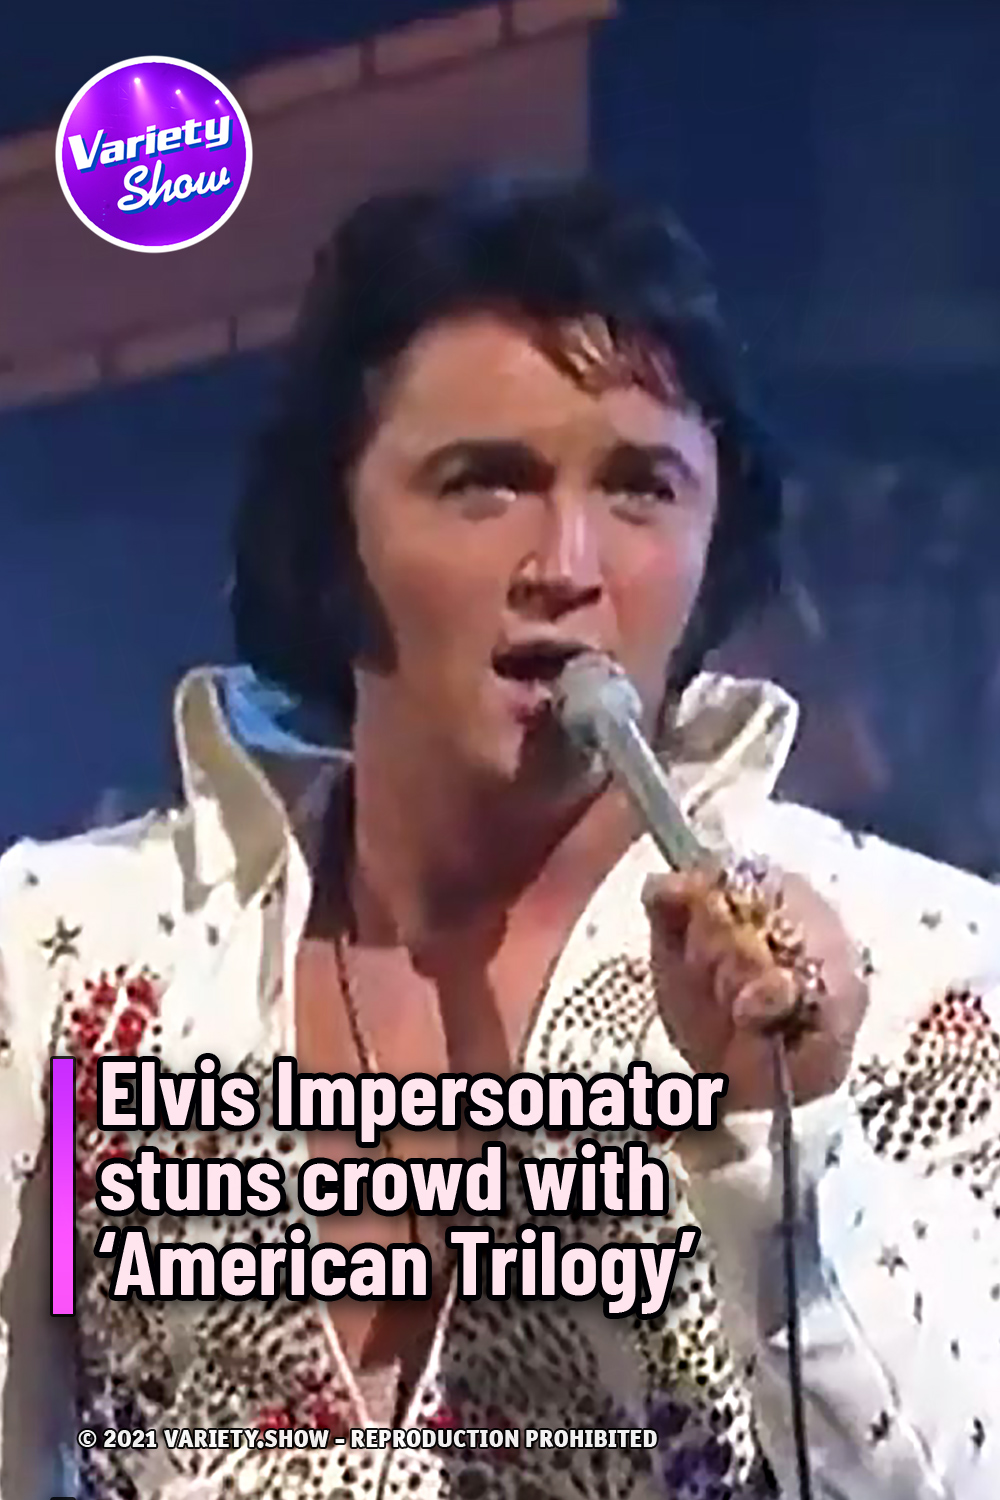 Elvis Impersonator stuns crowd with ‘American Trilogy’